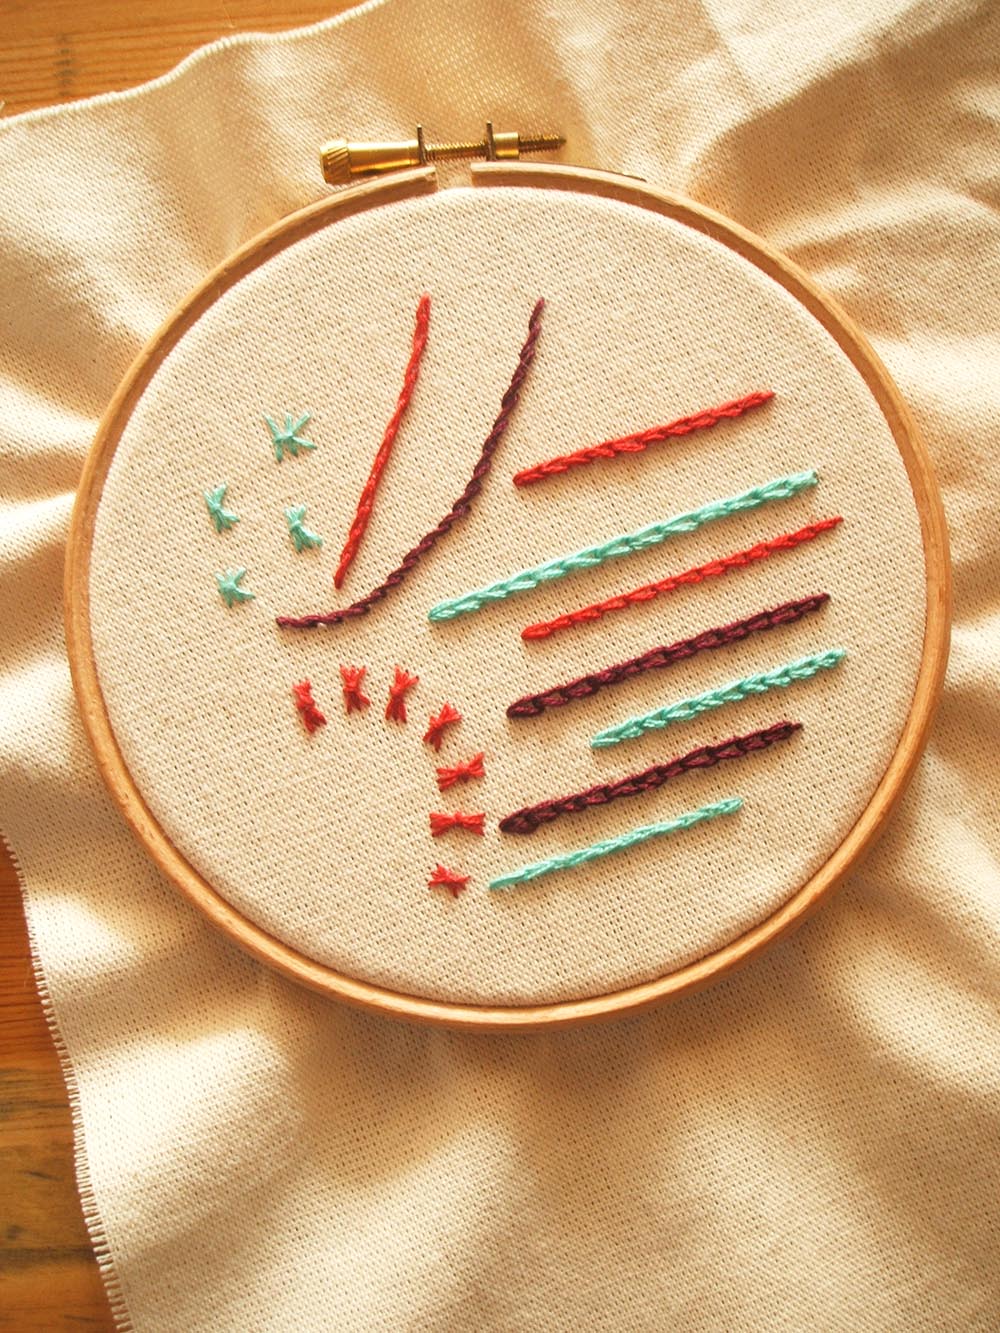 Me, You and Magoo: Learning New Embroidery Stitches